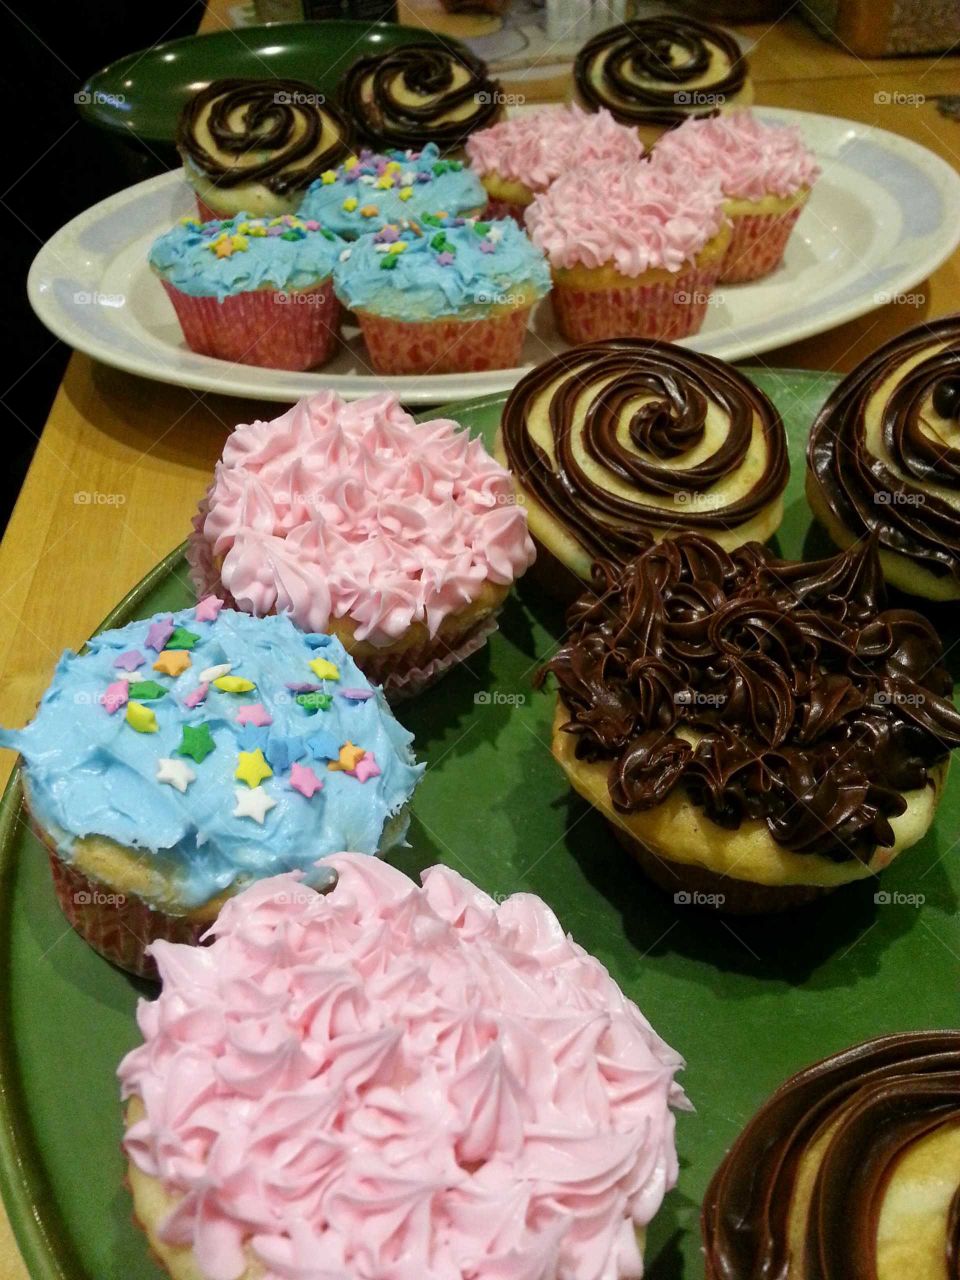 Colorful cupcakes!